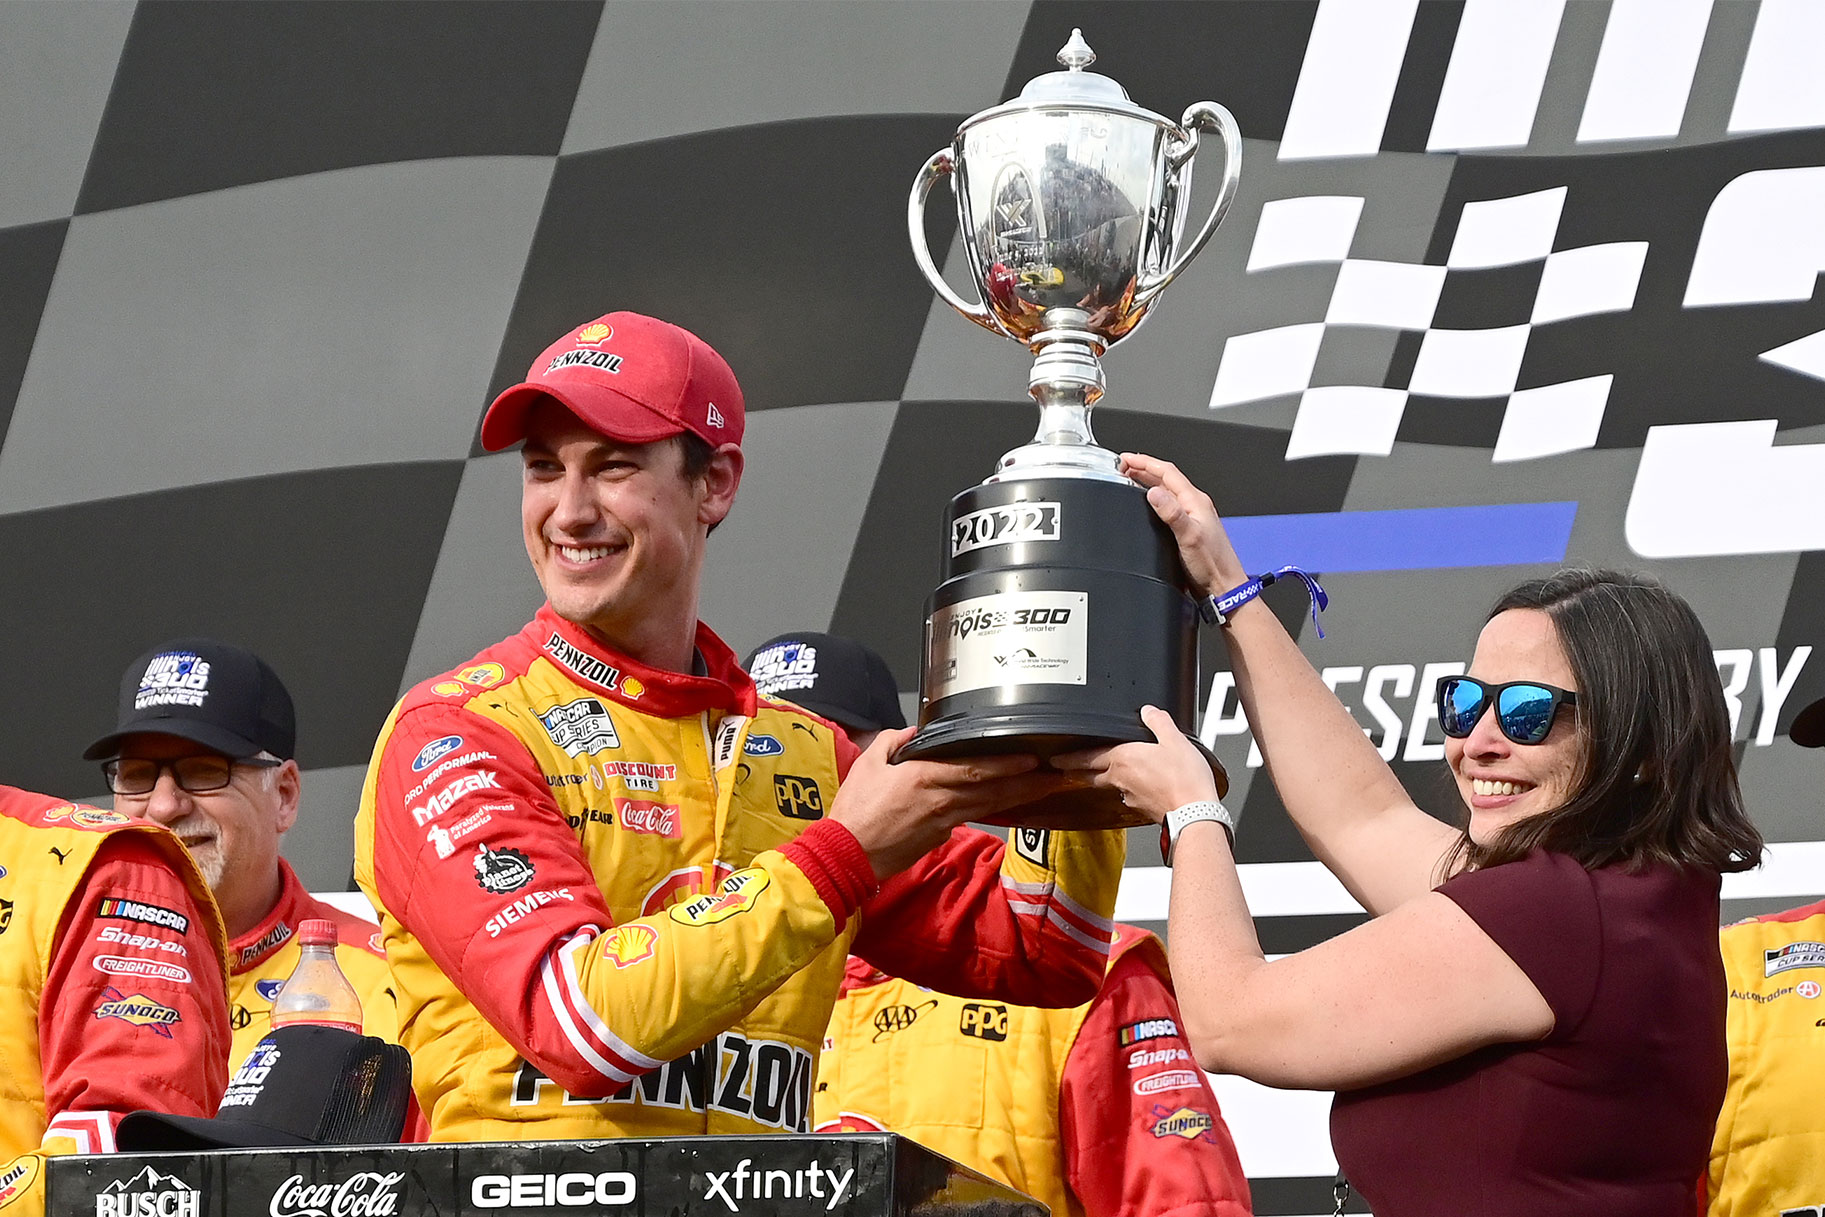 Joey Logano (#22 Team Penske Ford) is presented with the trophy after winning the inaugural NASCAR Cup Series Enjoy Illinois 300